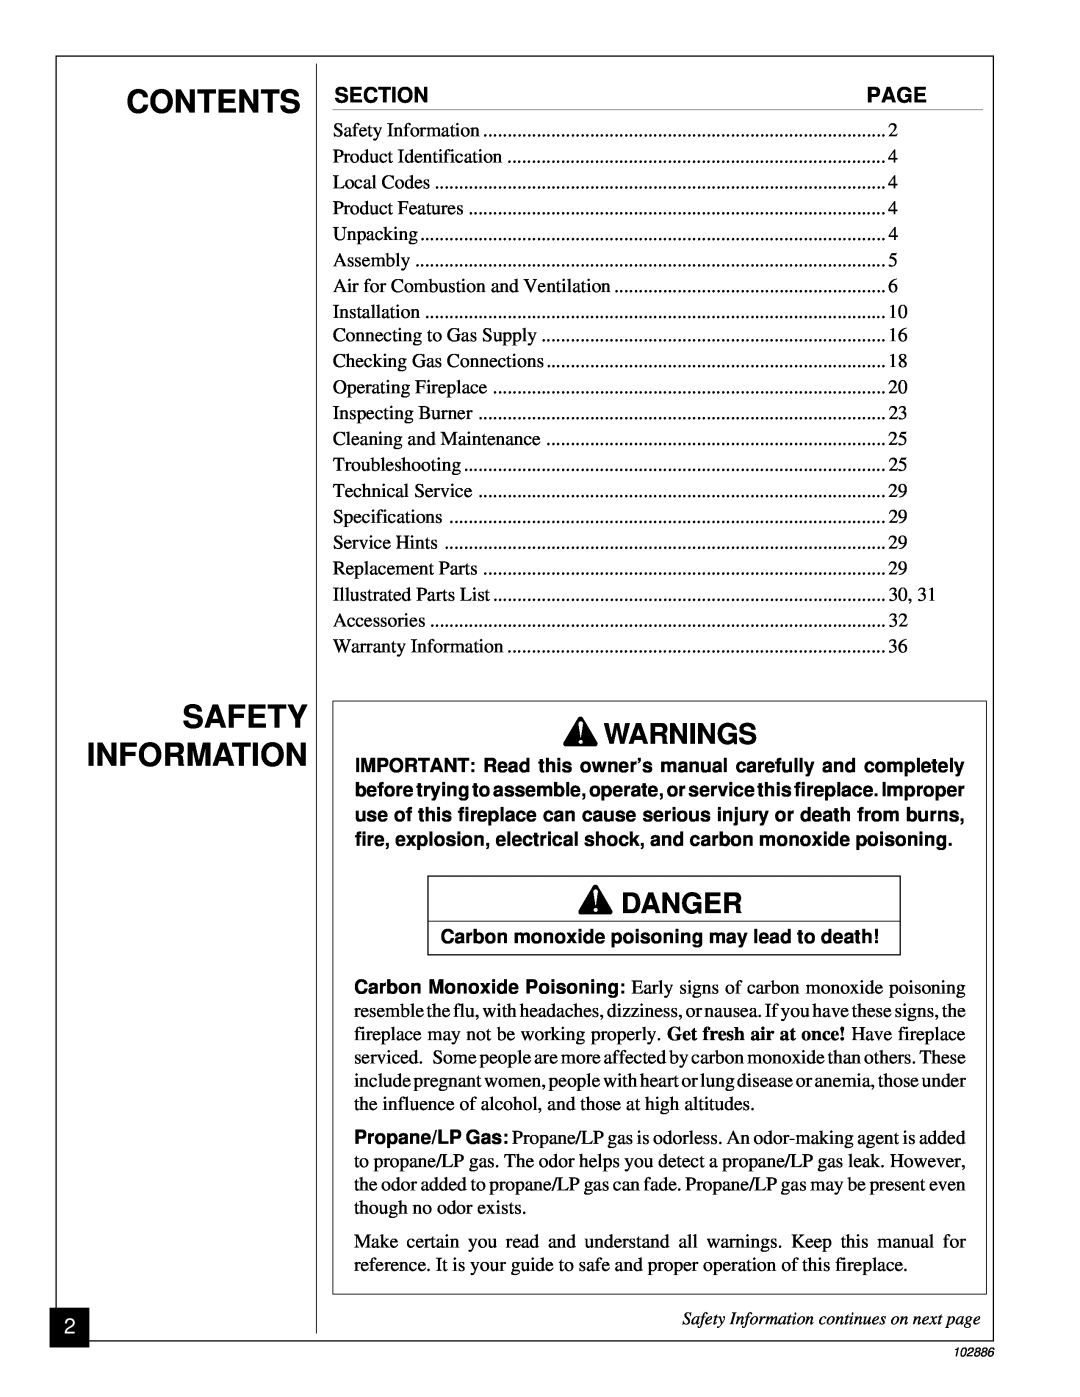 Vanguard Heating VMH26TPB installation manual Contents Safety Information, Danger 